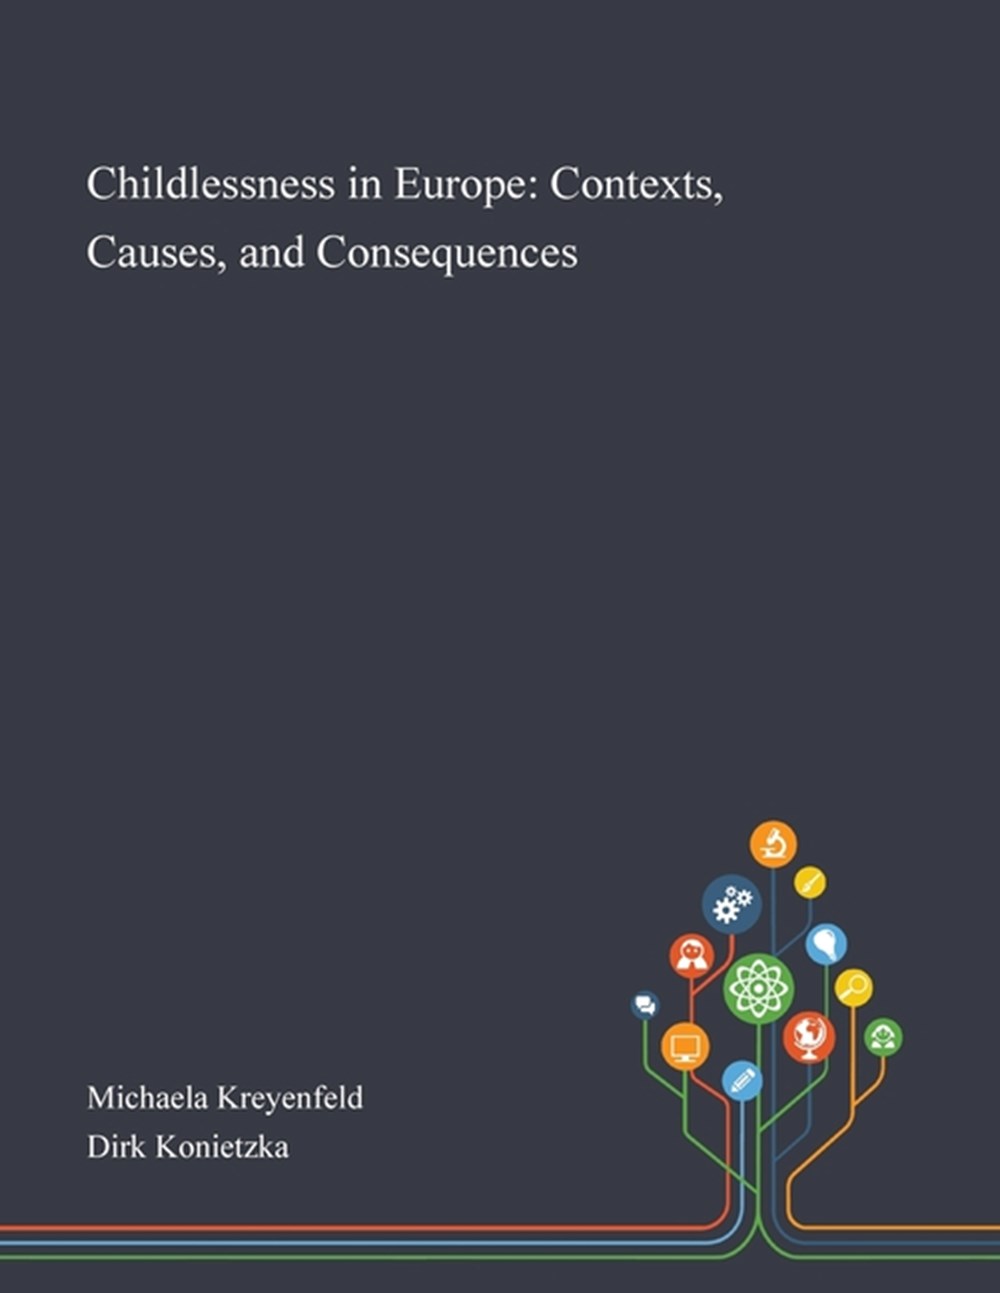 Childlessness in Europe Contexts, Causes, and Consequences